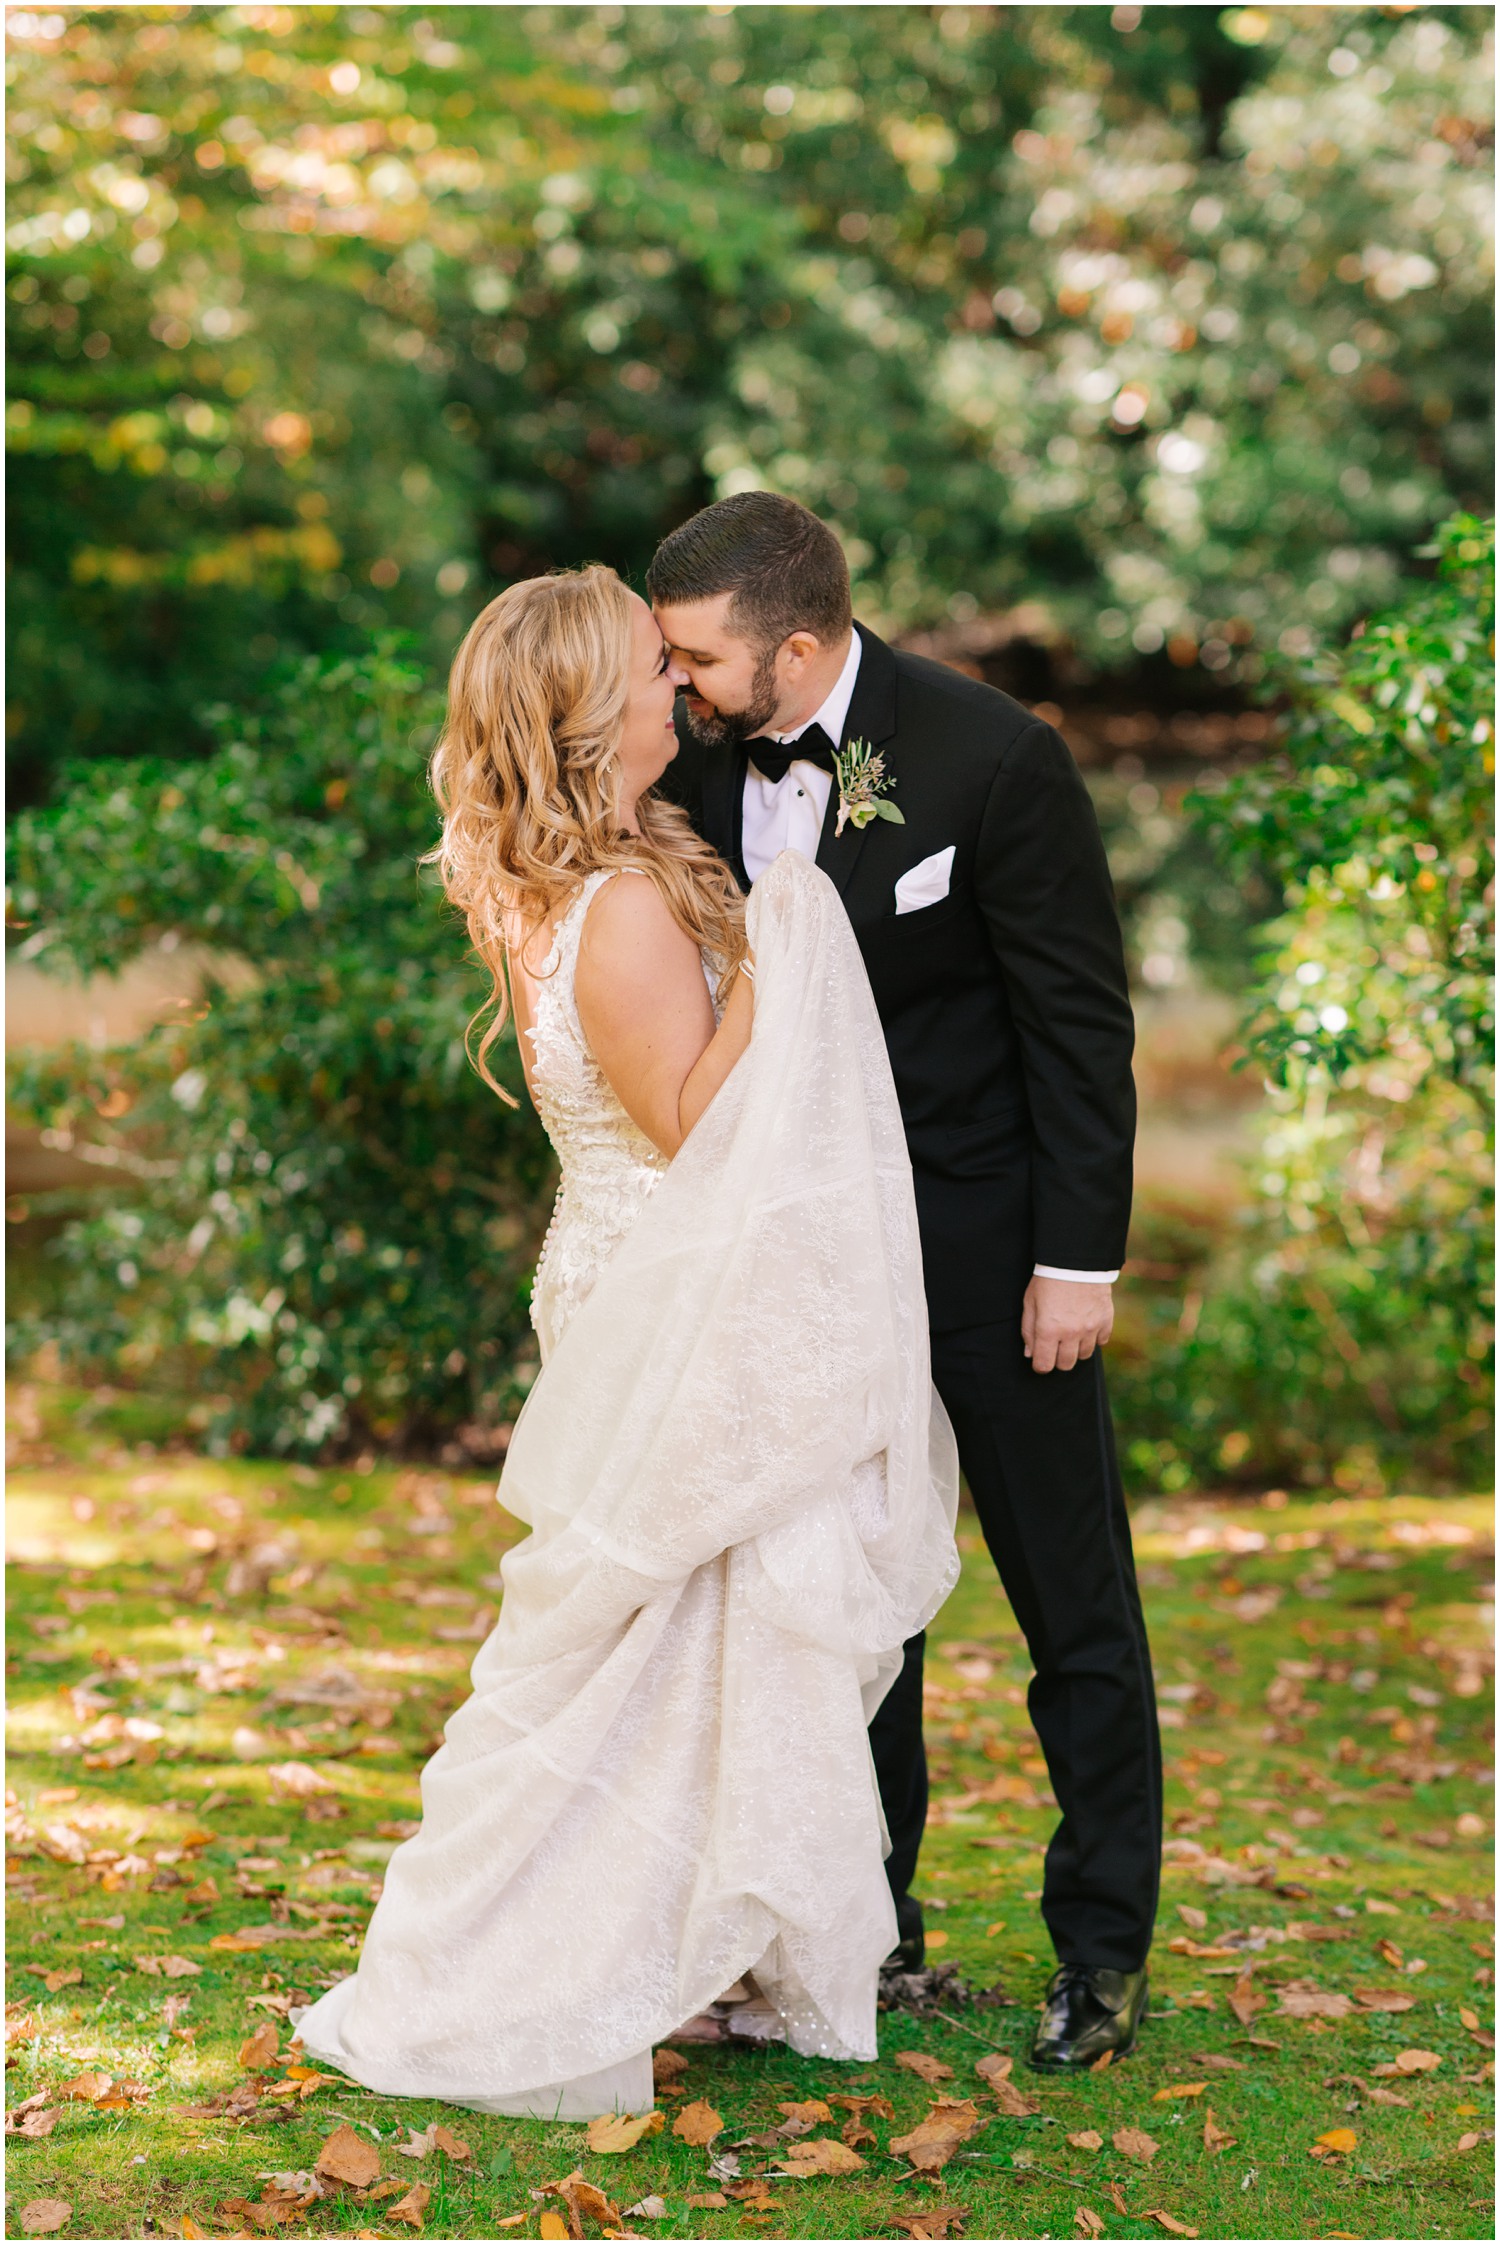 bride and groom kiss during first look while bride holds up underskirt of wedding dress